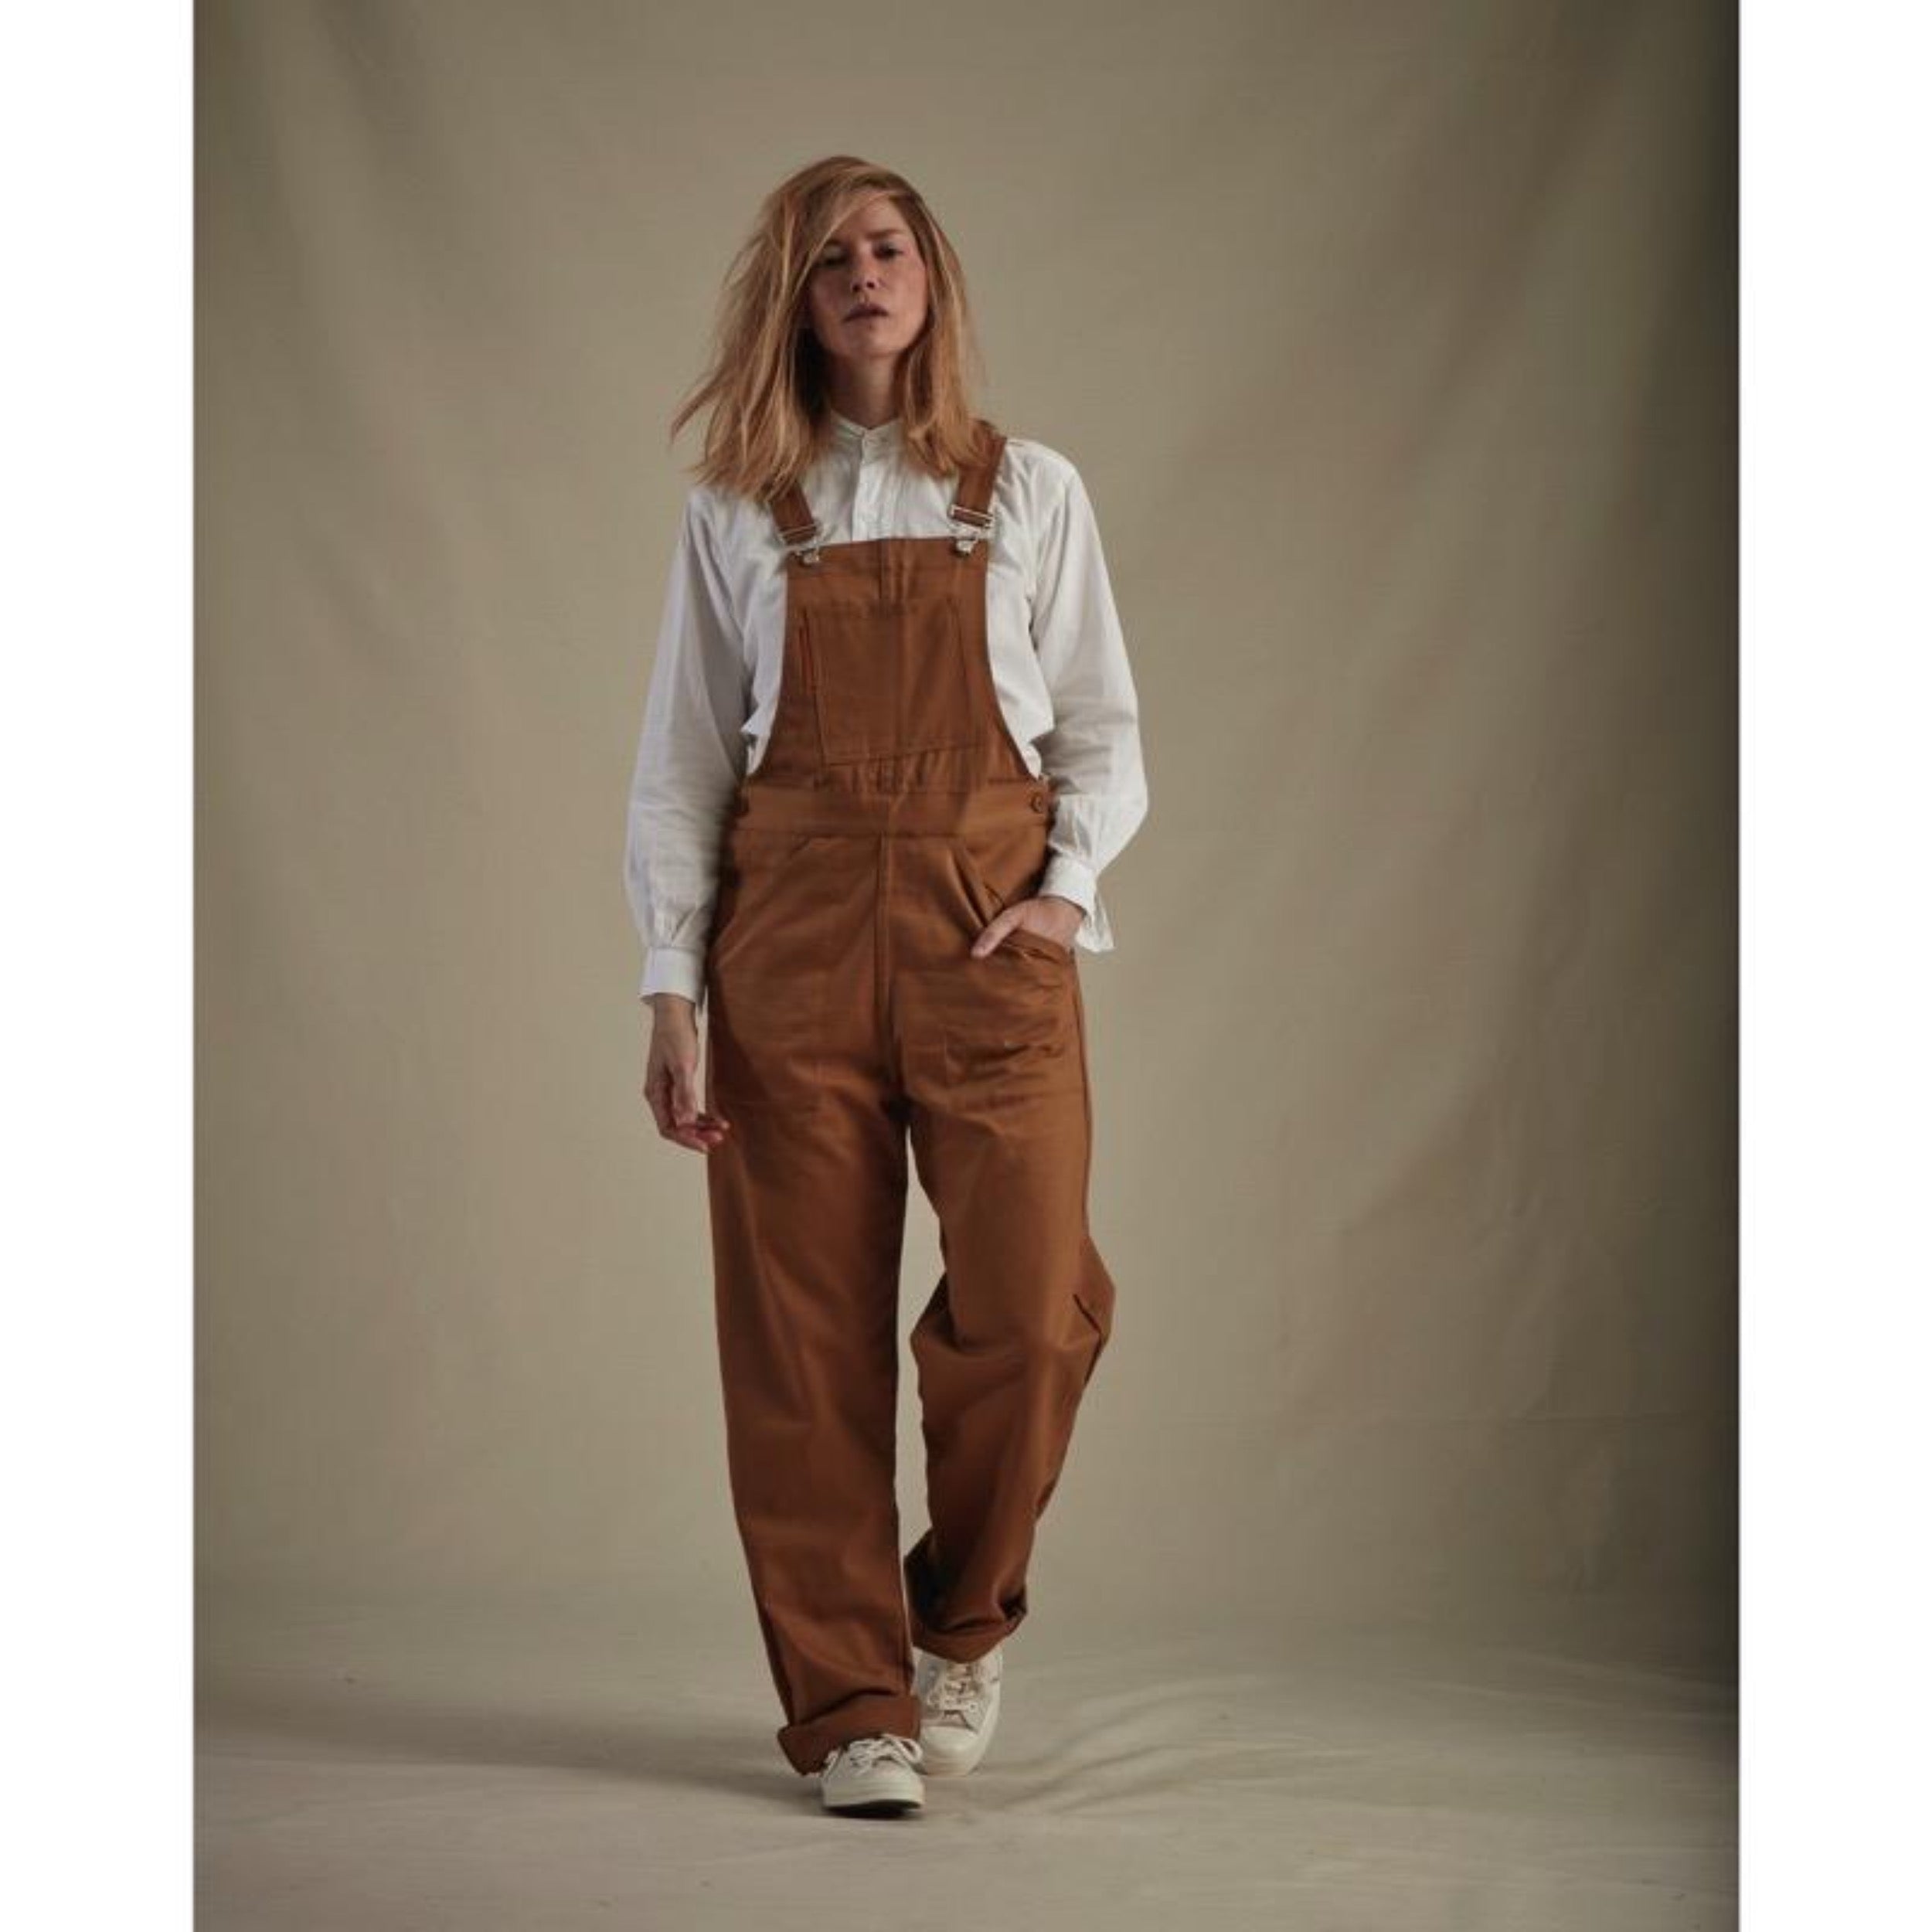 Sienna is 5'6", a 10-12 dress size and is wearing Small dungarees